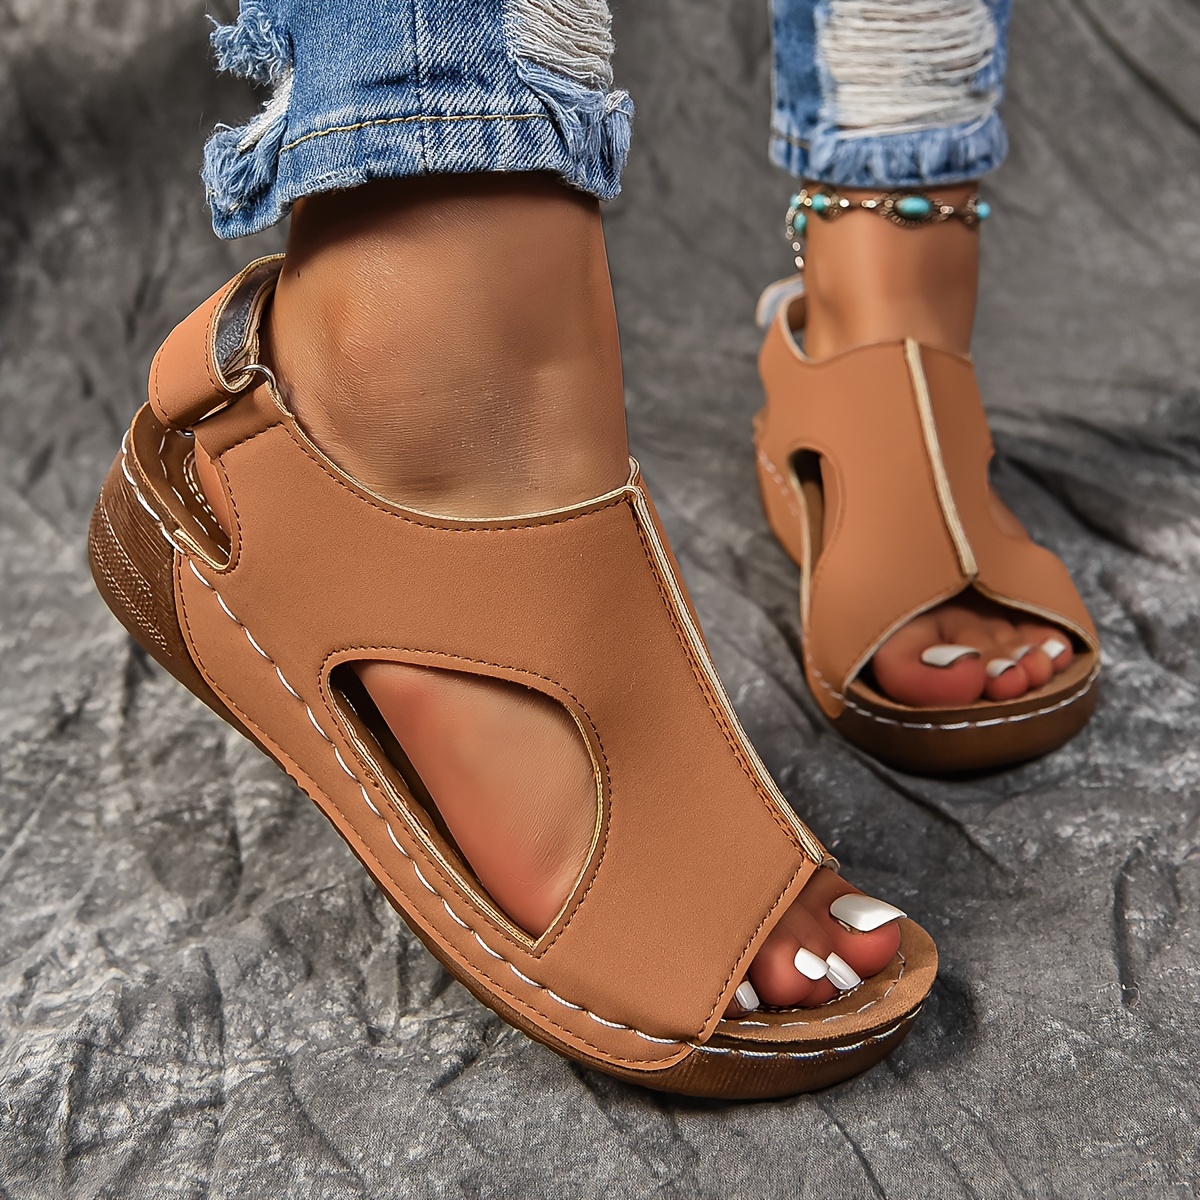 women s solid color wedge heeled sandals casual open toe details 20